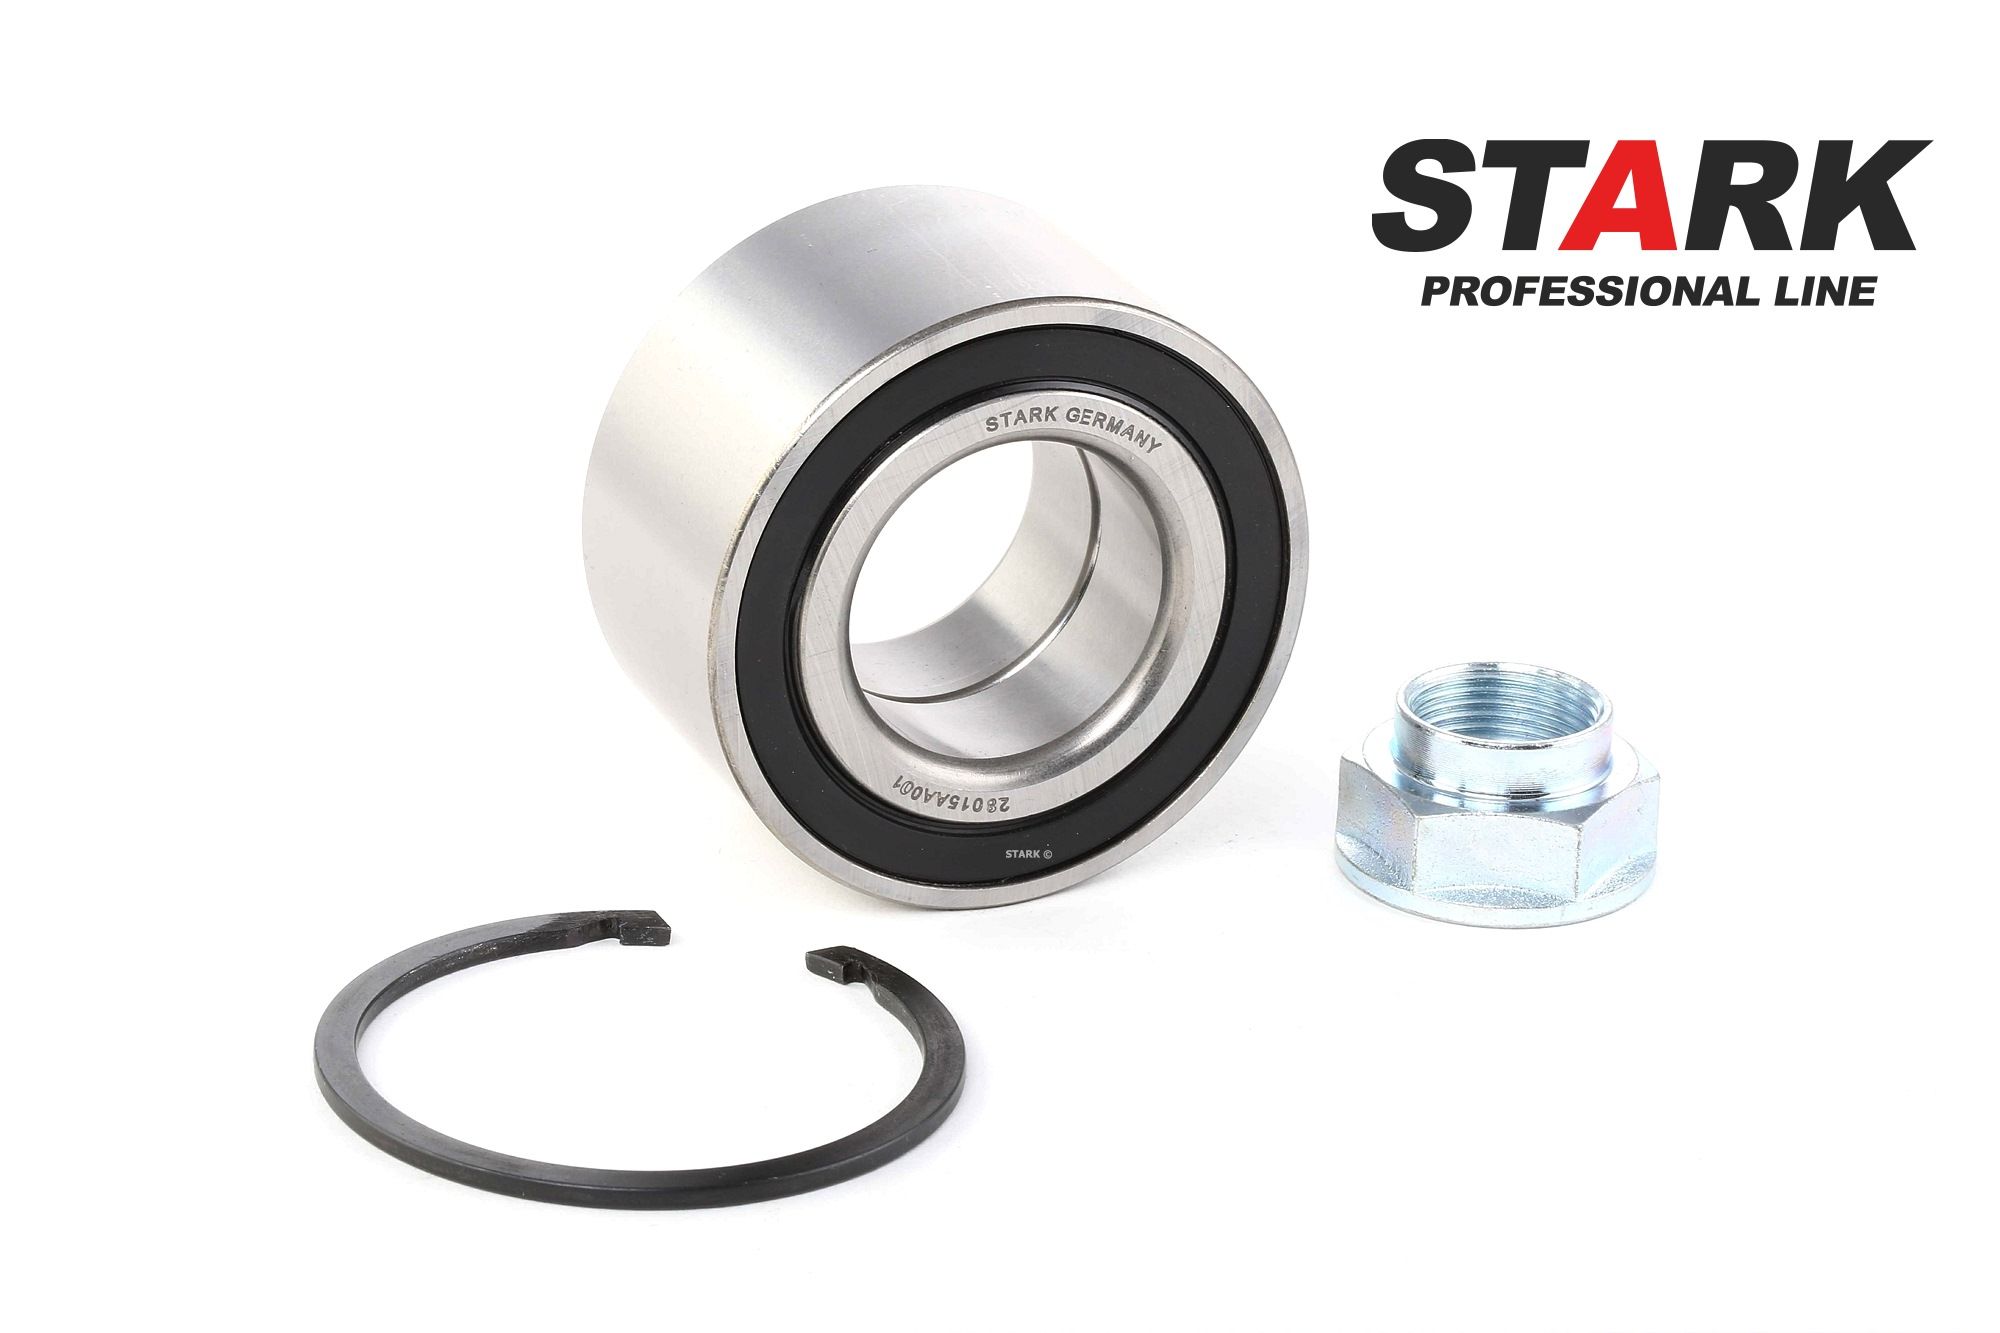 STARK SKWB-0180057 Wheel bearing kit Front axle both sides, with retaining ring, with nut, 73,0 mm